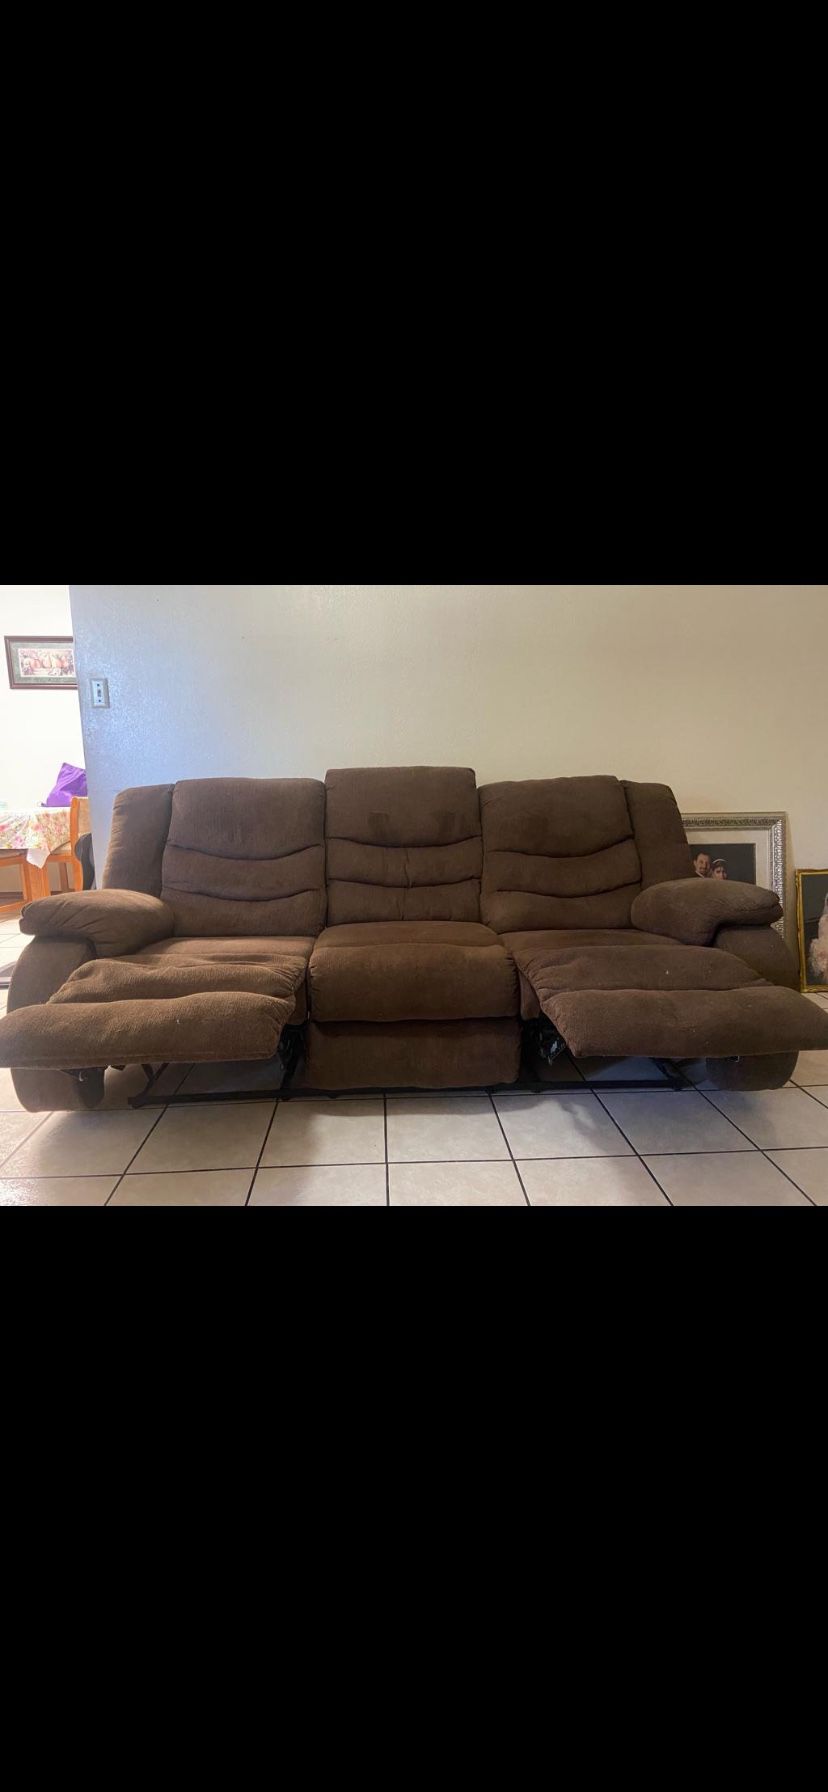 2 Piece Large  Living Room Set (with Recliner Feature)